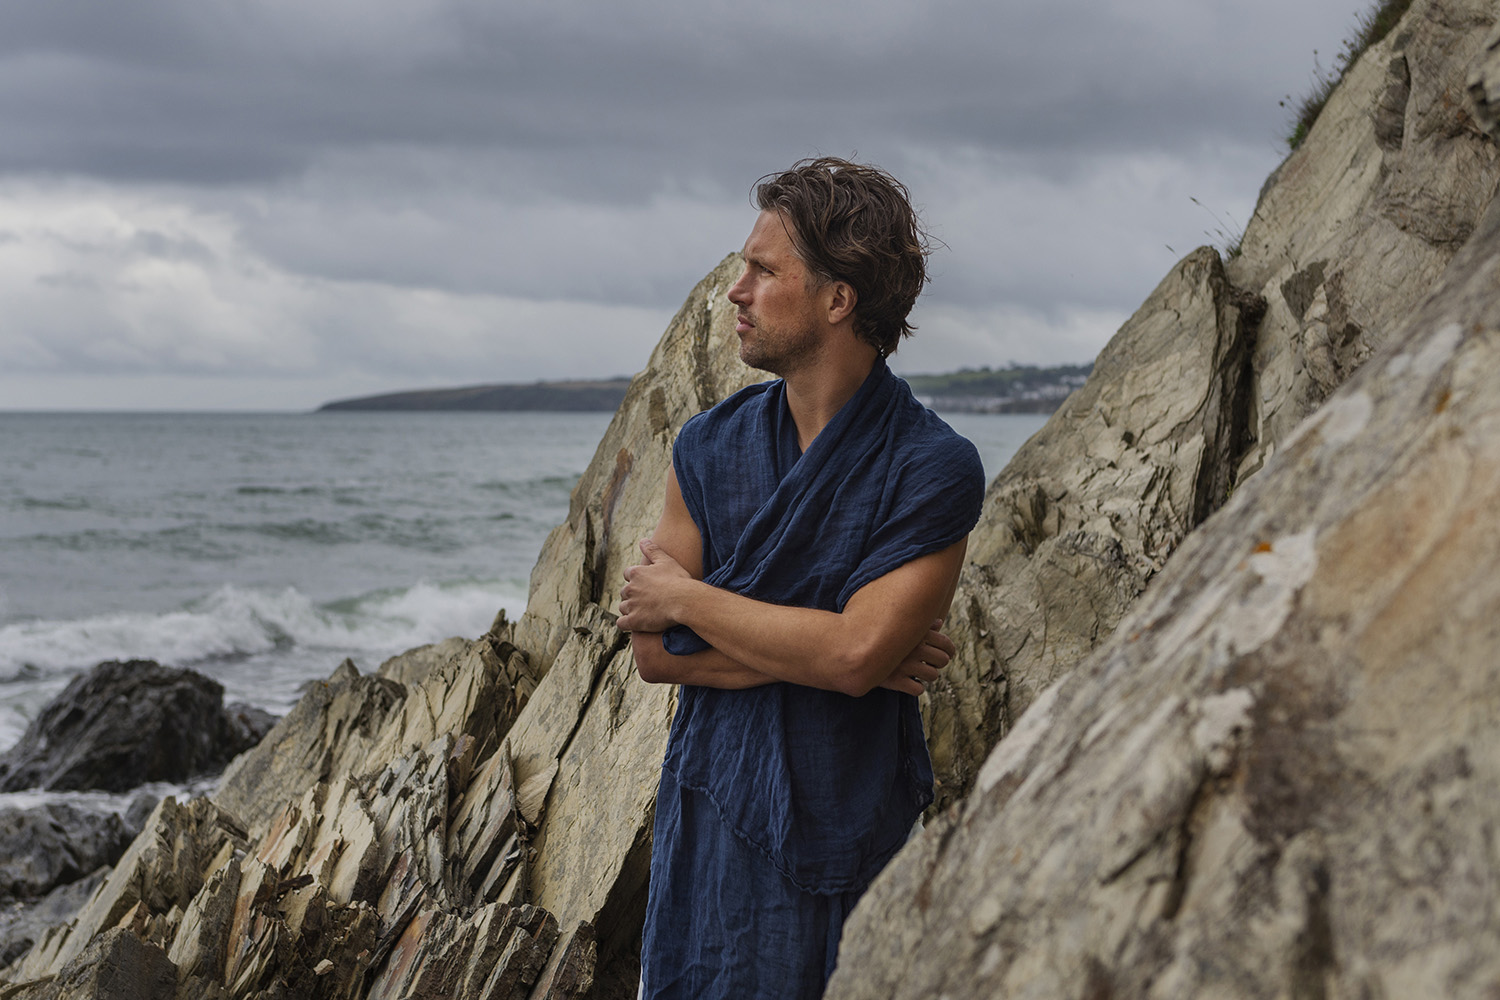 a male model gazes out to sea, wrapped in a dark blue linen scarf with rocks and coastline in the background 